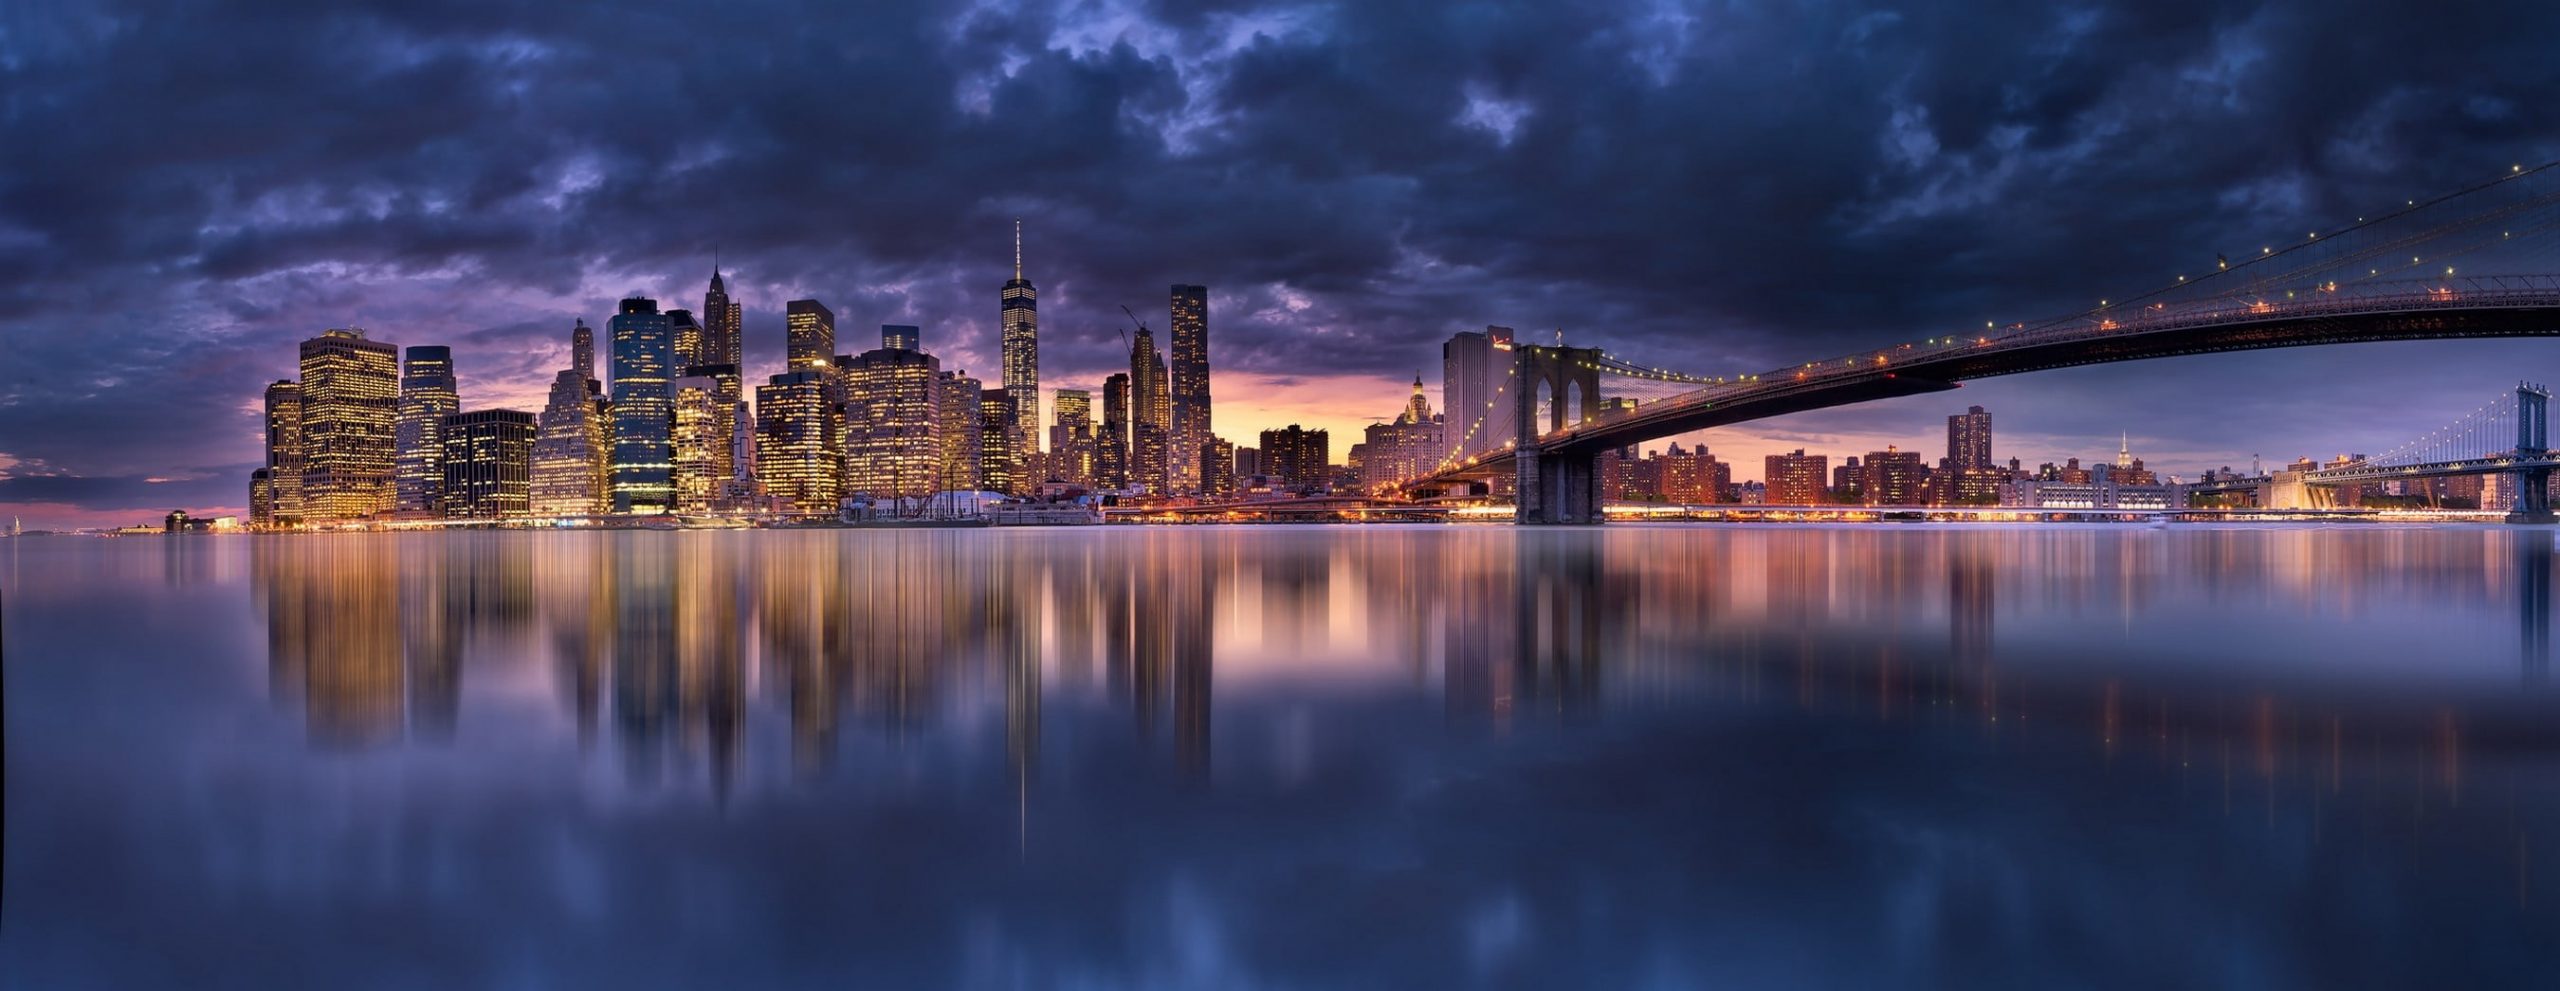 Wallpaper Bridge painting, Panoramic photography of cityscape and body of water